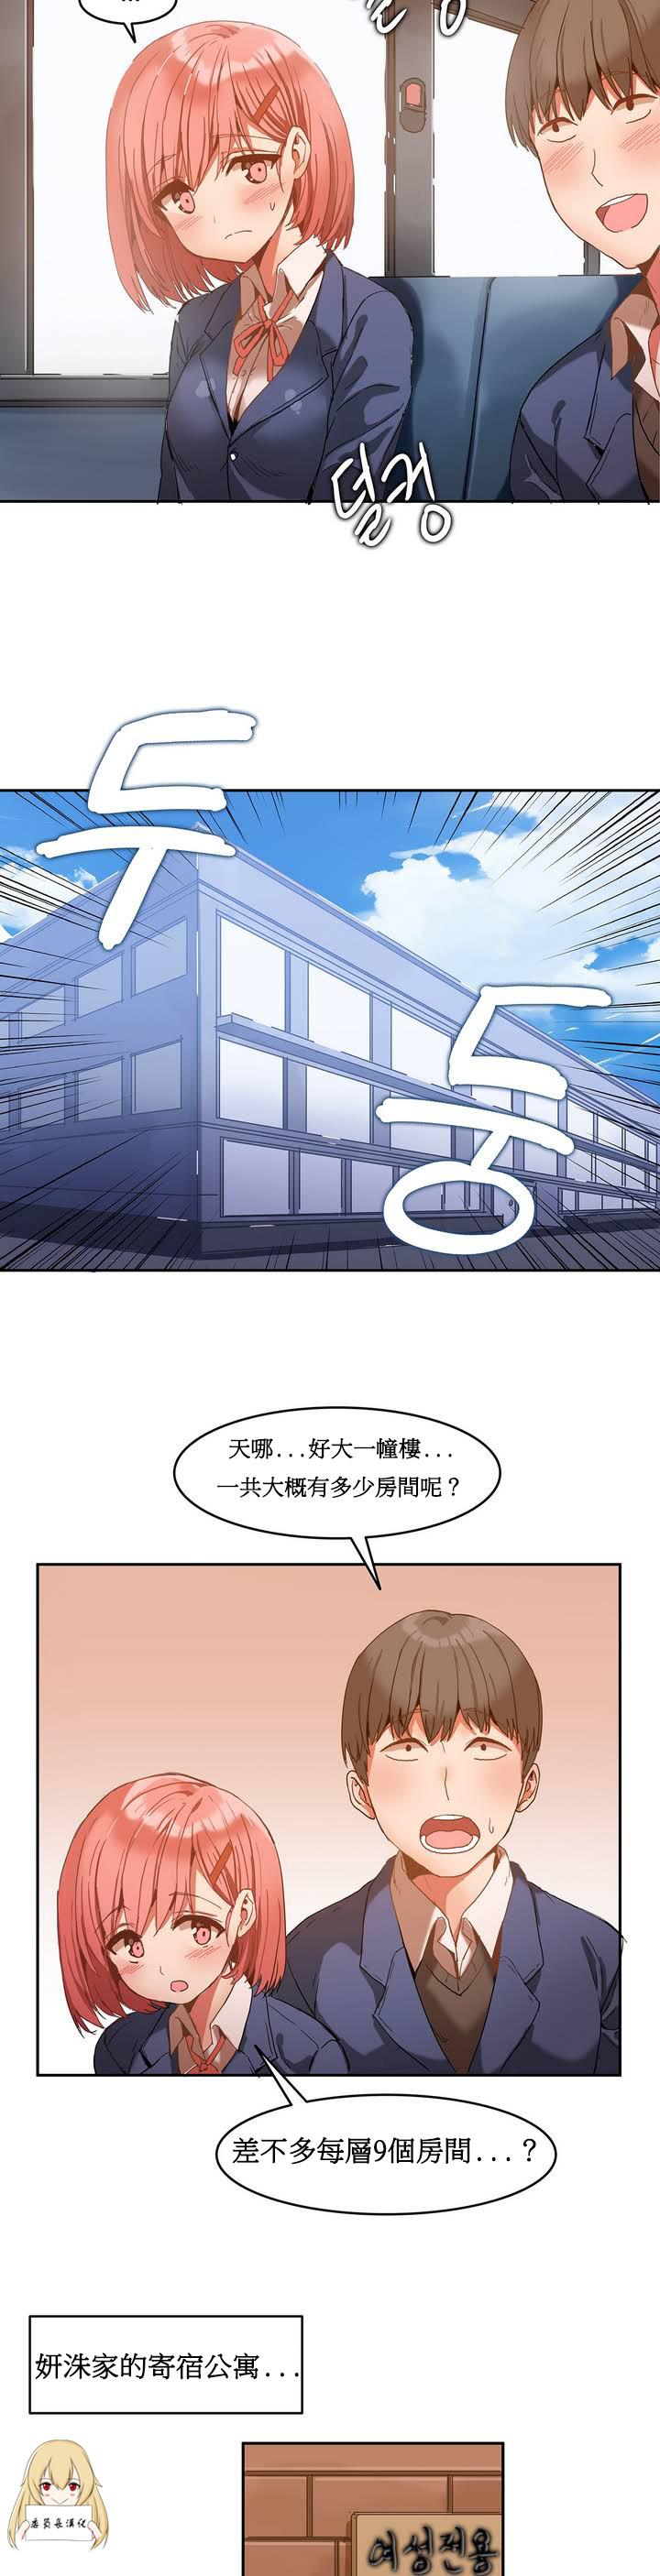 Hentai Hahri's Lumpy Boardhouse Ch. 0~30【委員長個人漢化】（持續更新） Doggy - Page 11